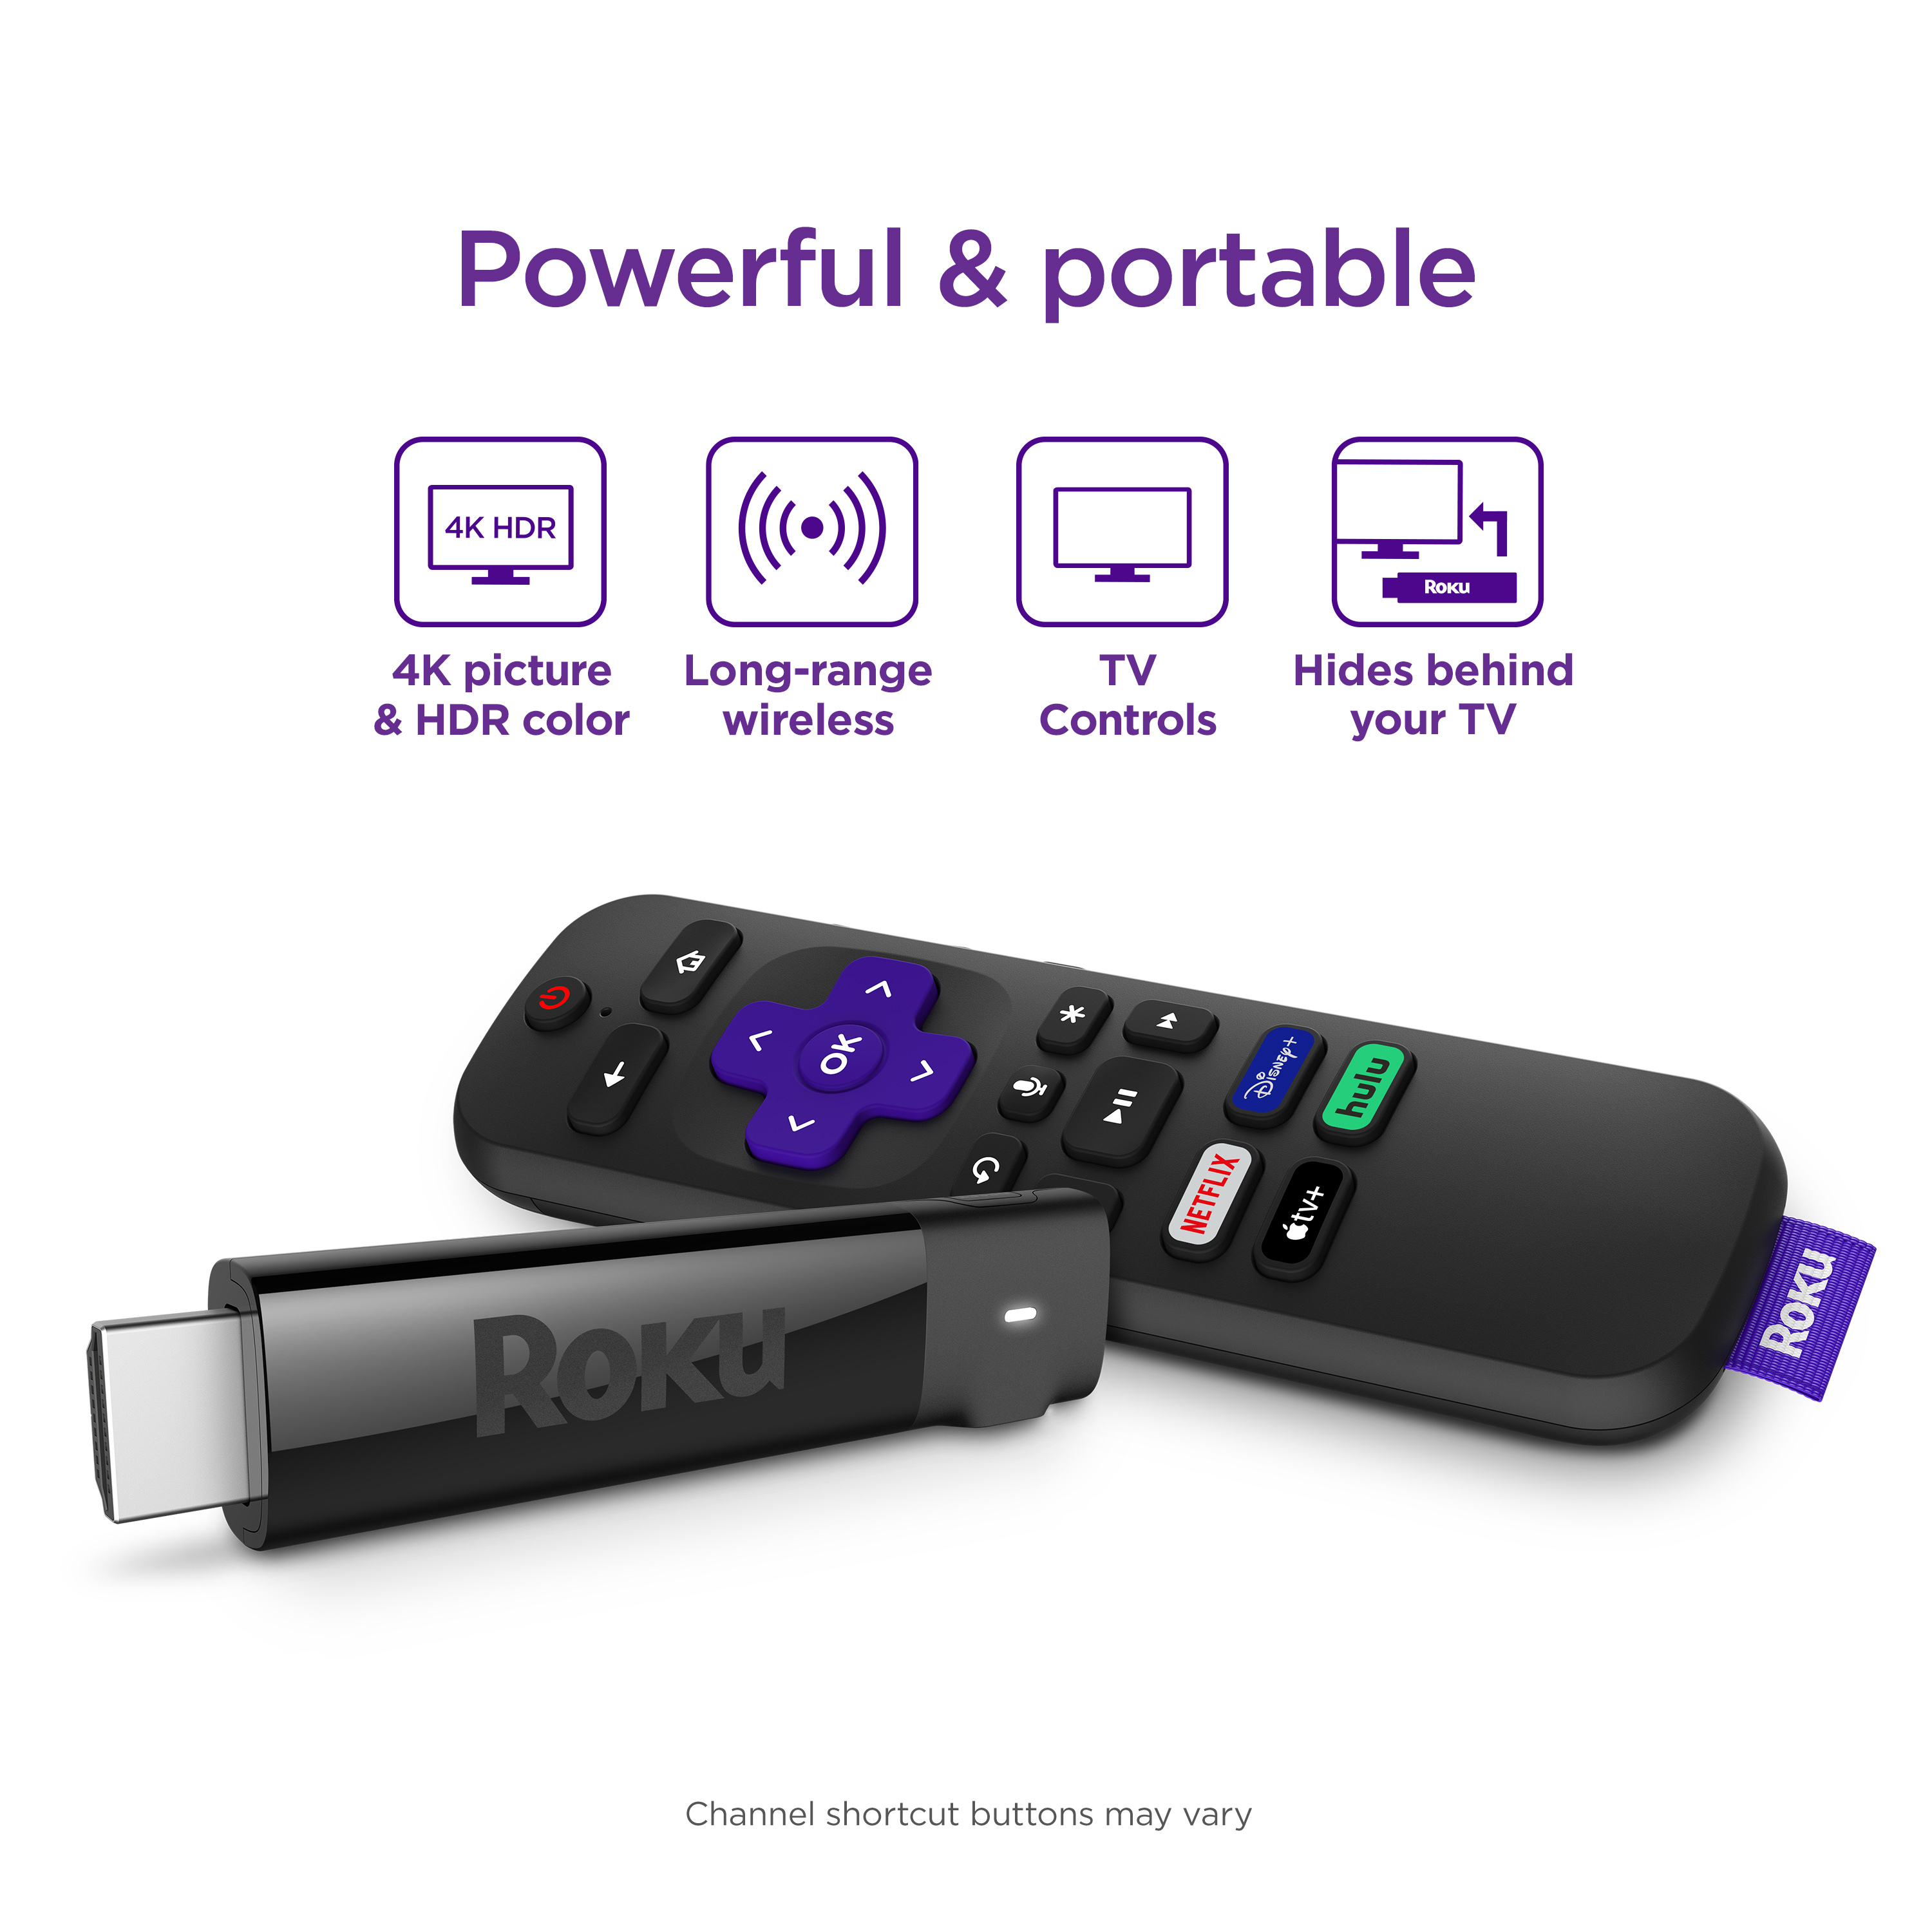 Roku Streaming Stick+ | HD/4K/HDR Streaming Device with Long-range Wireless and Roku Voice Remote with TV Controls - image 3 of 14